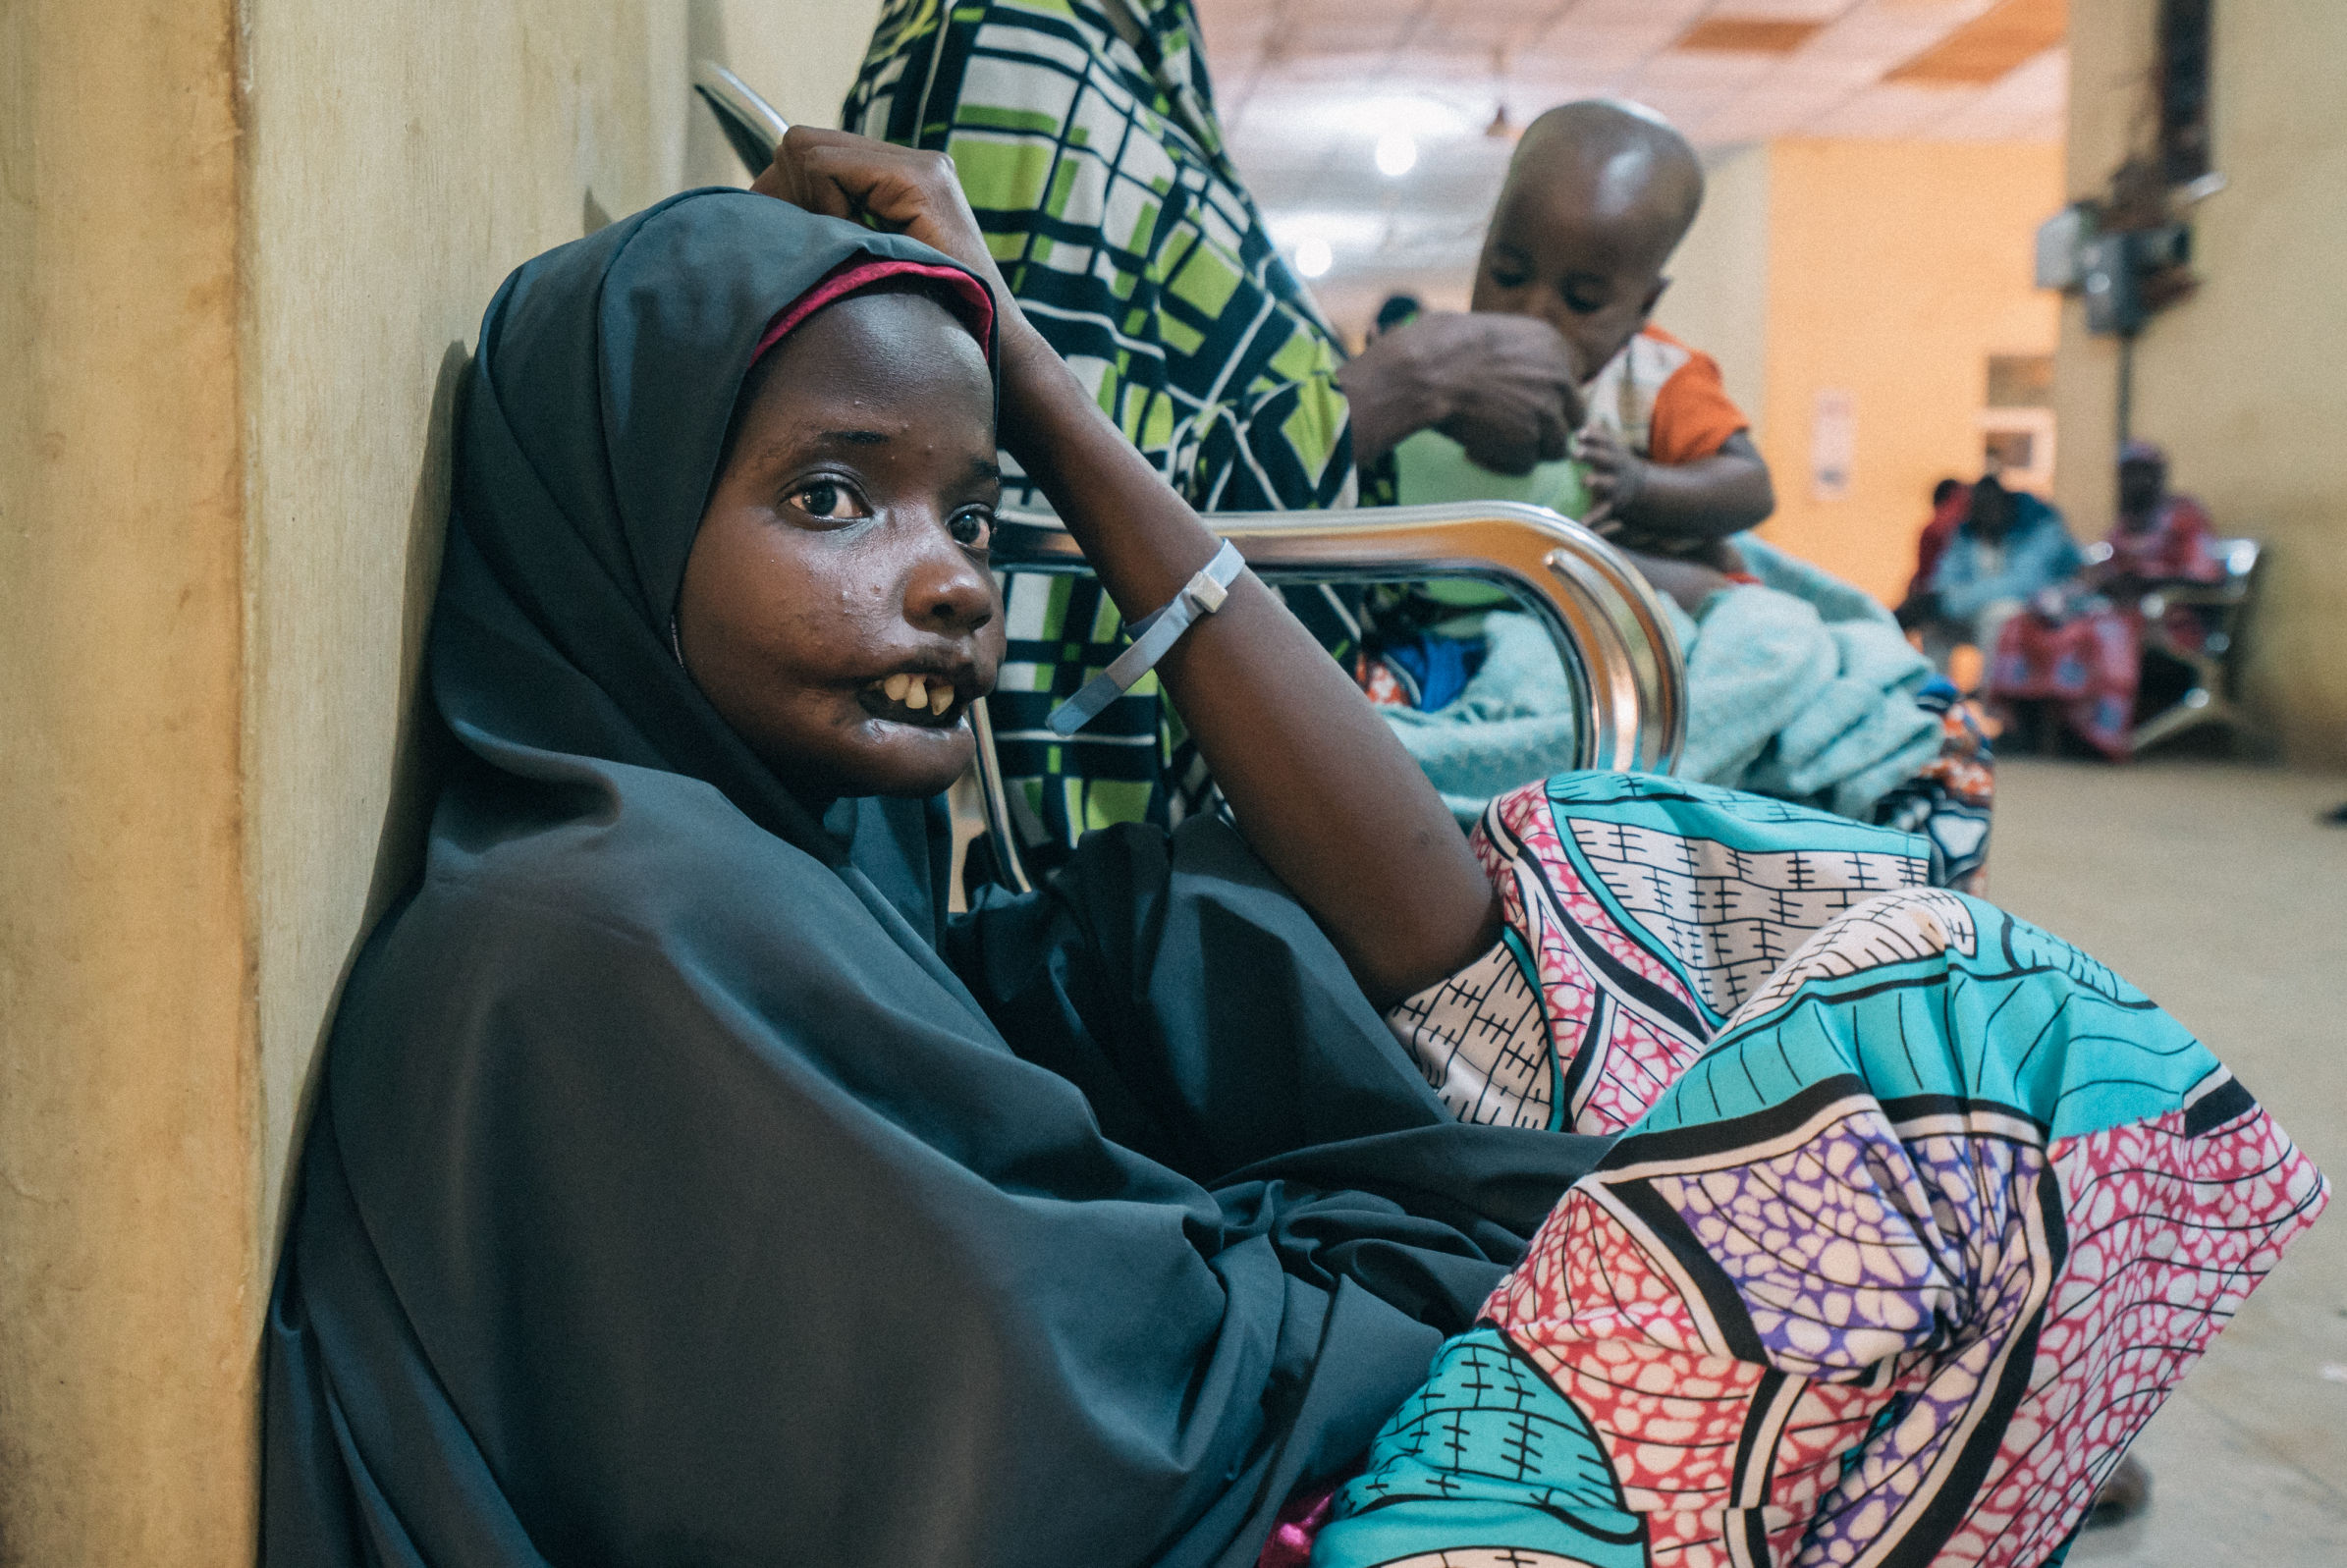 Amina, an 18-year-old noma patient from Yobe state, in the Sokoto Noma Hospital. Photo by Claire Jeantet - Fabrice Caterini/INEDIZ.